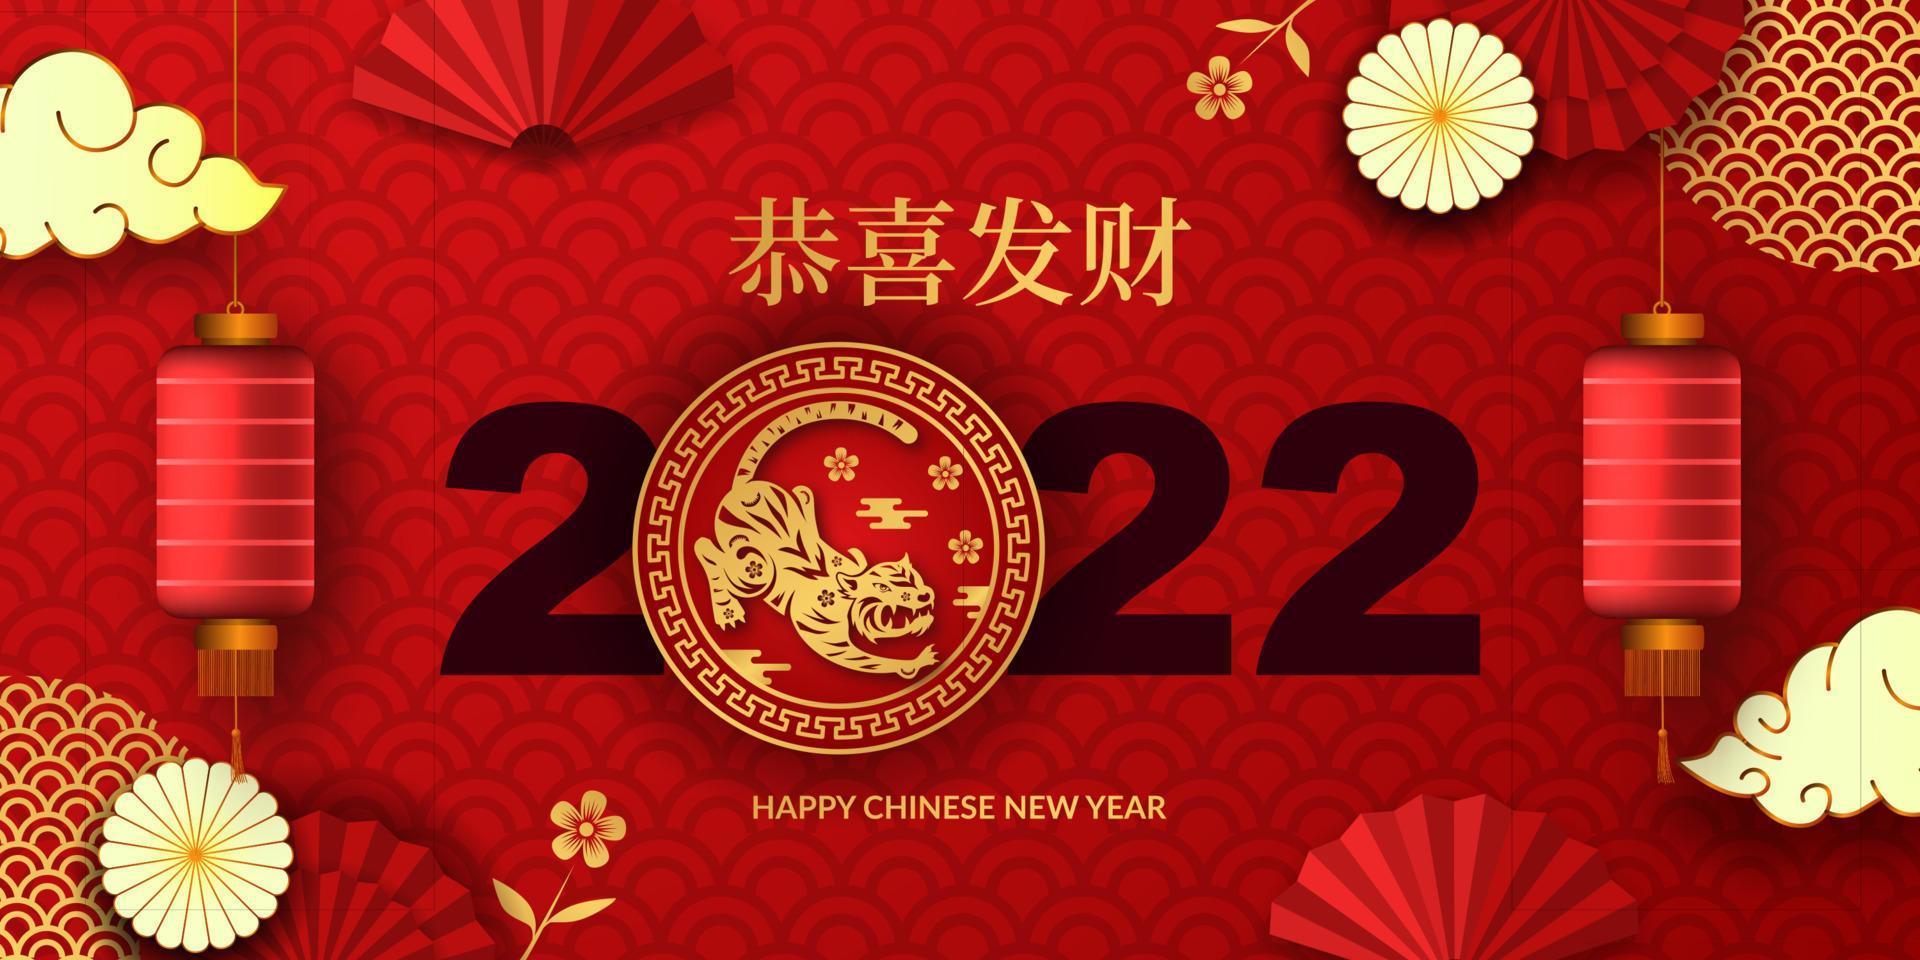 Happy chinese new year 2022 year of tiger. 3d red lucky traditional ornament, lantern, pattern decoration asian golden color for greeting card template vector